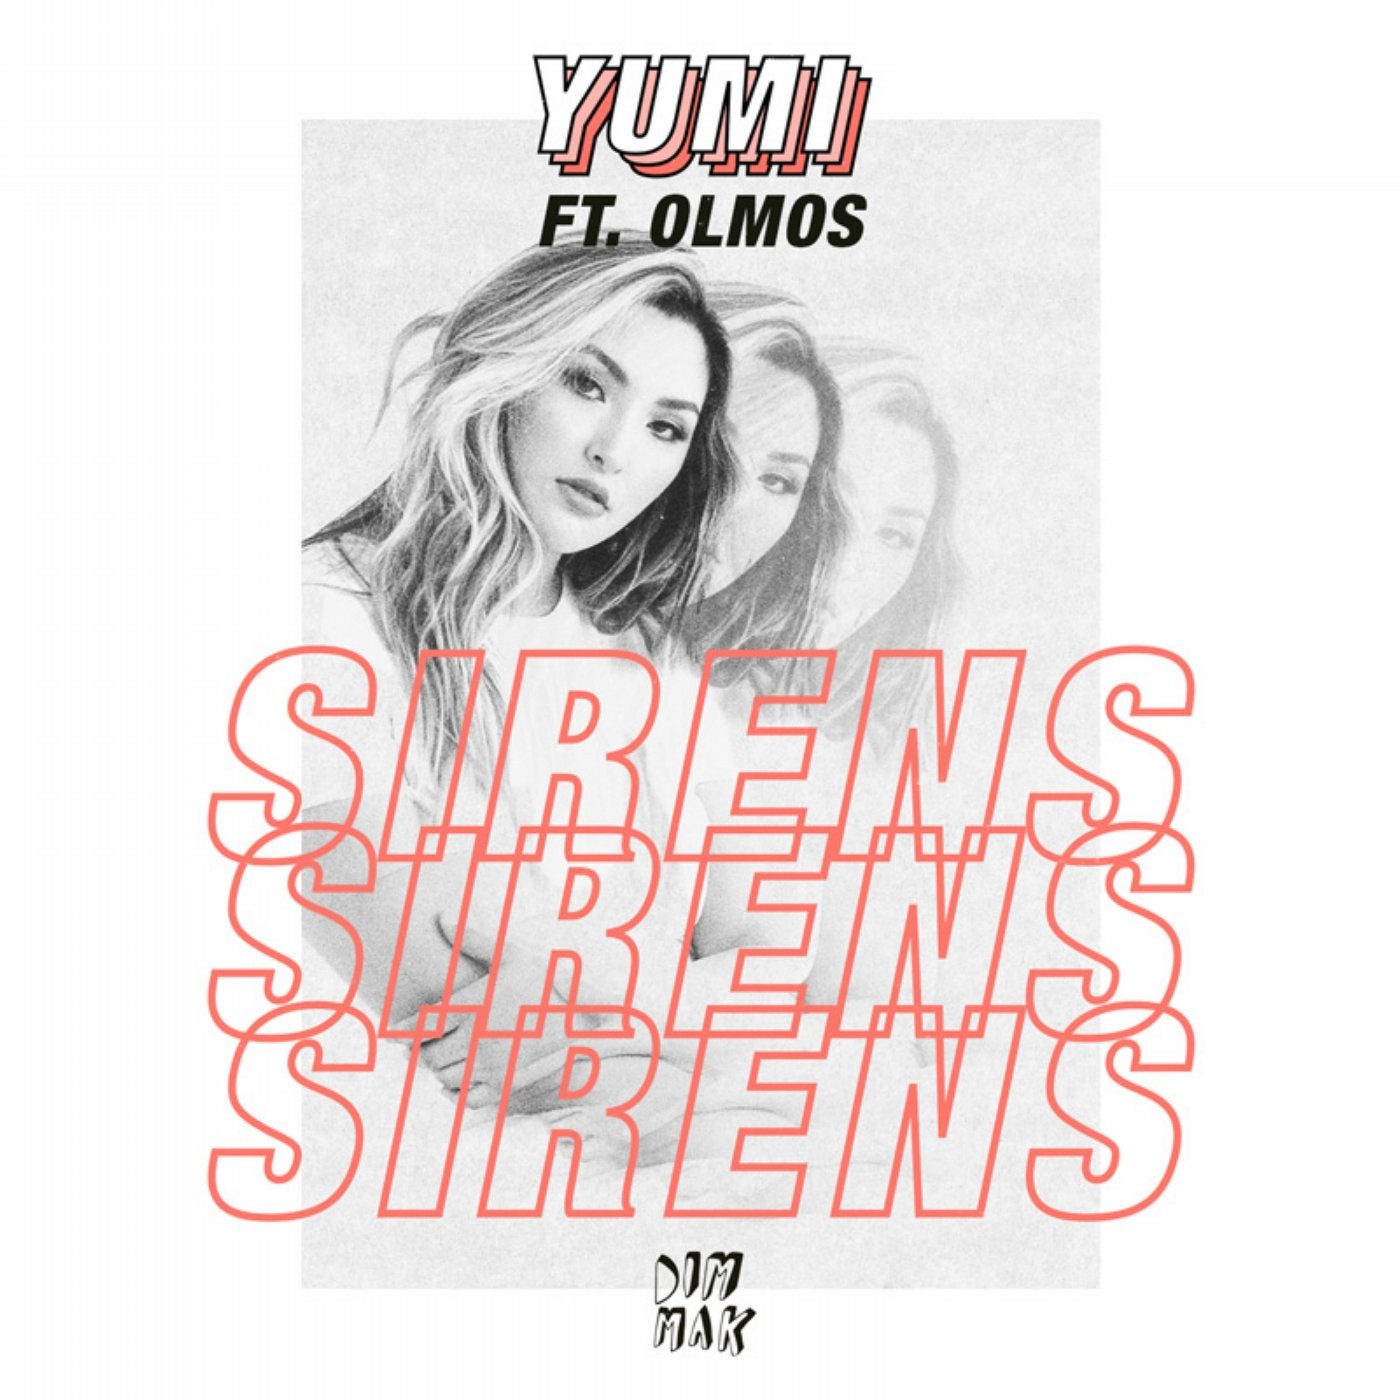 Sirens (feat. Olmos)